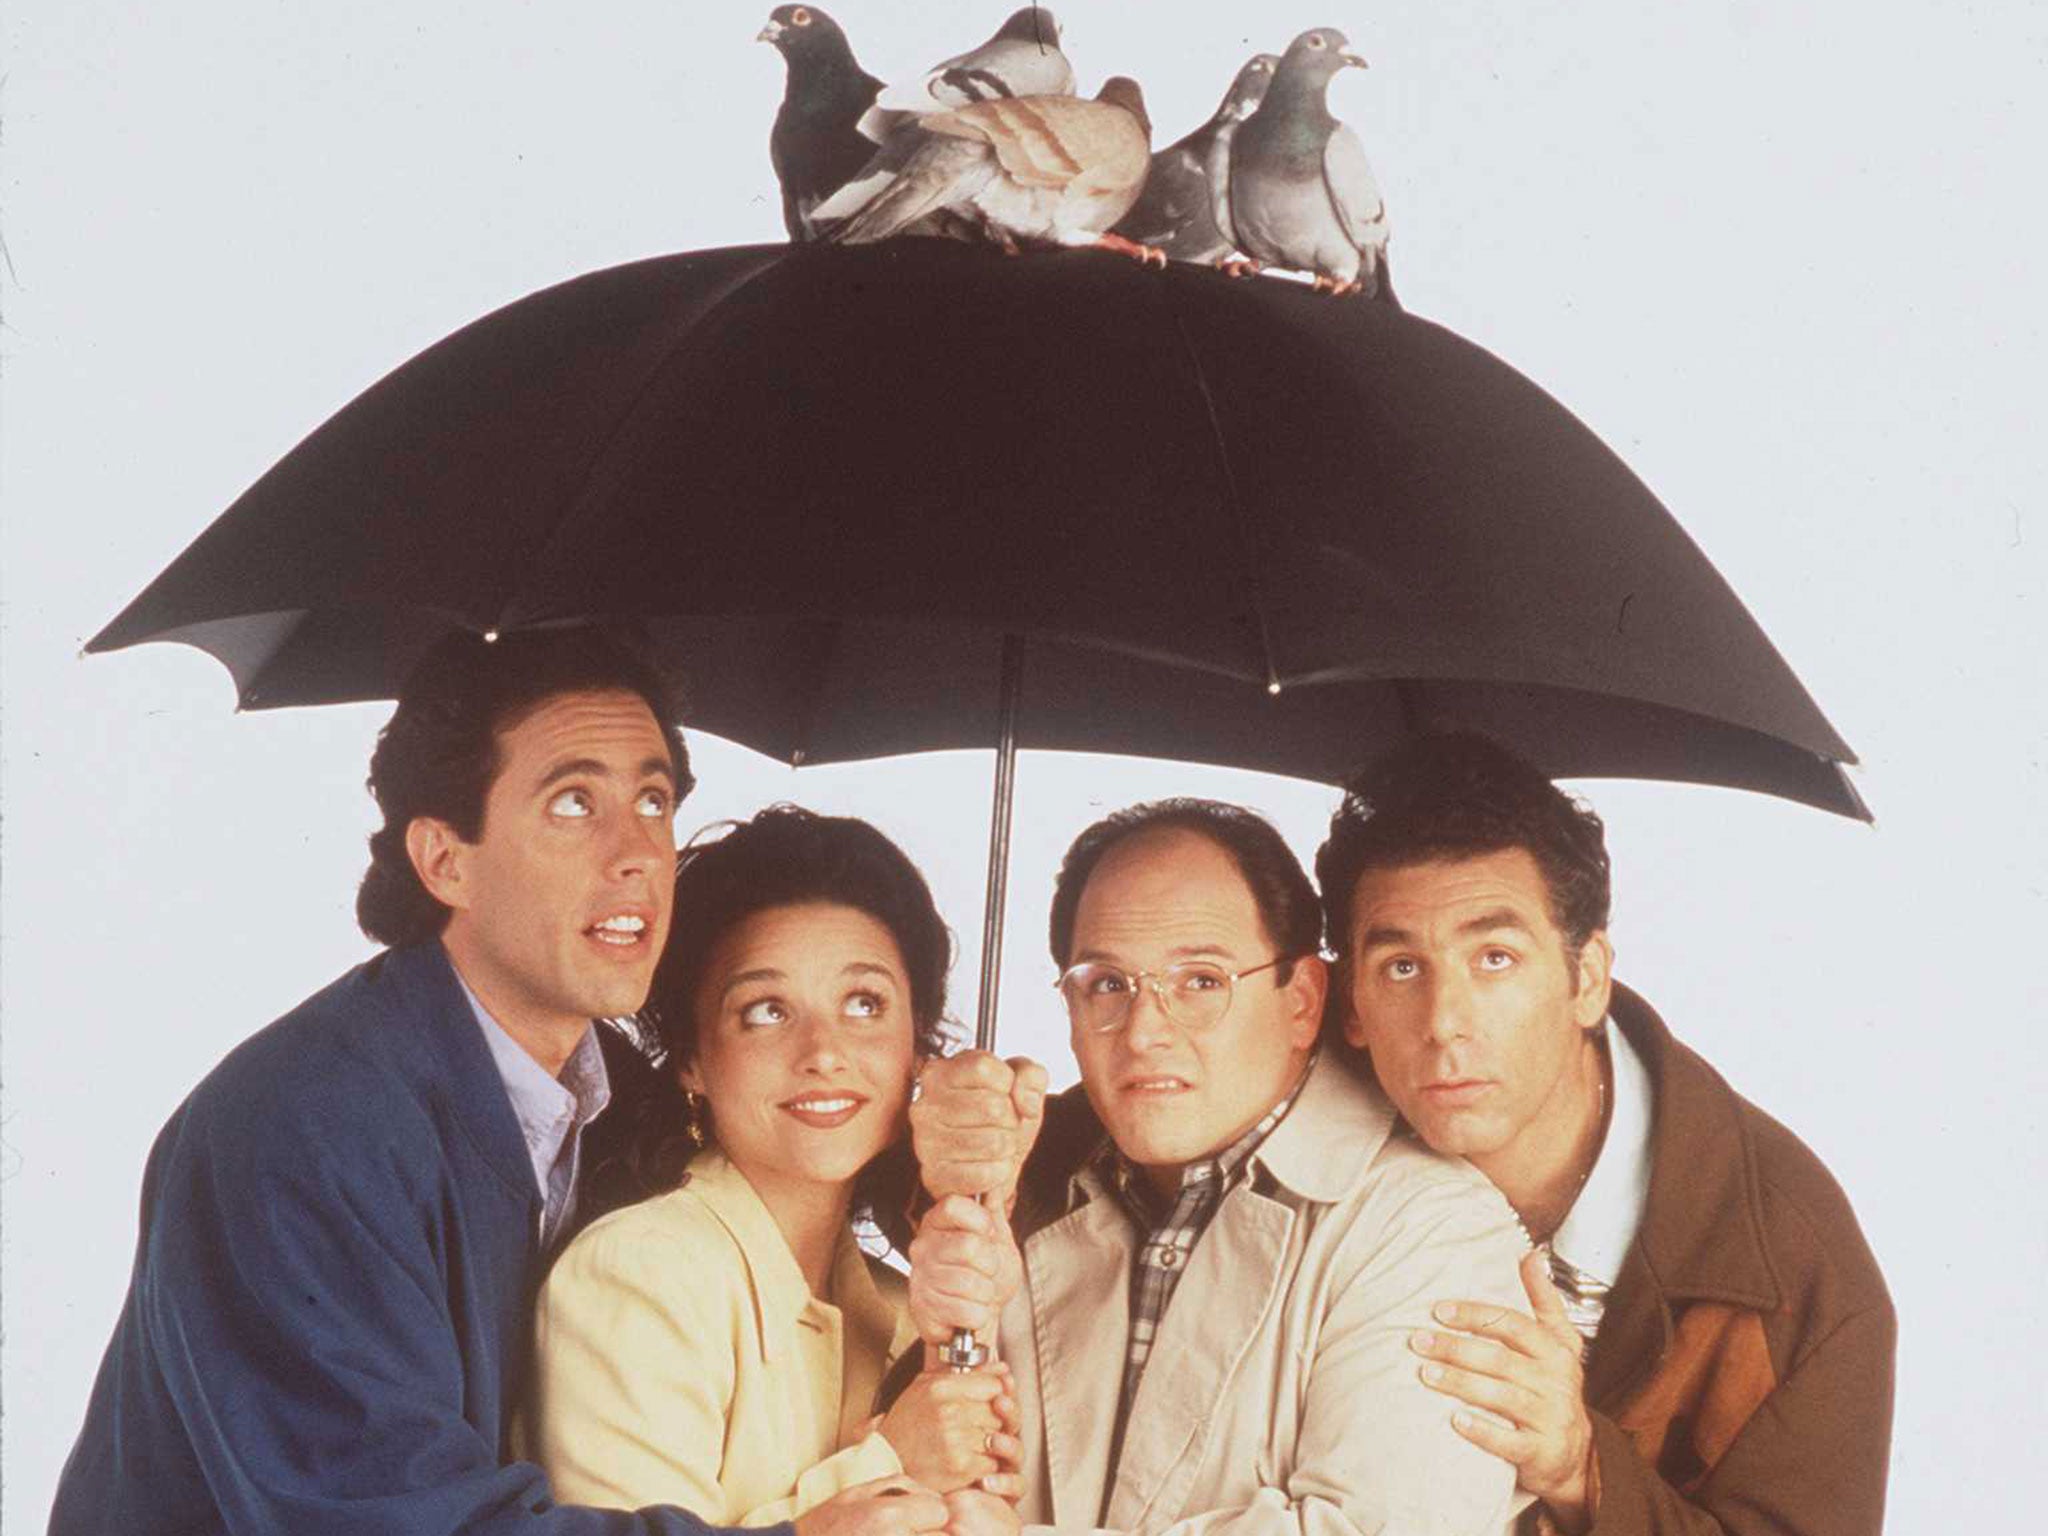 The cast from the show Seinfeld